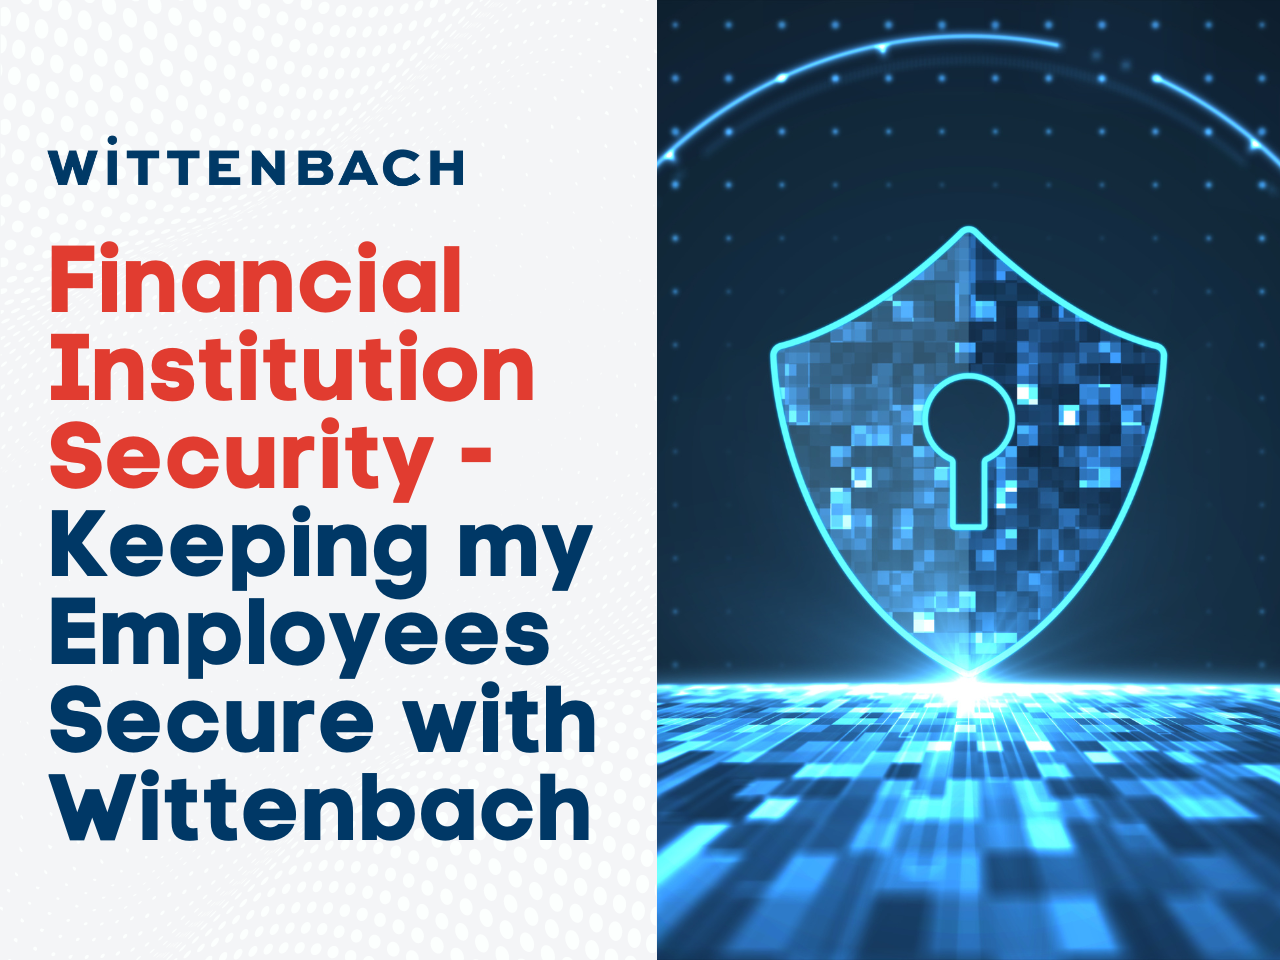 Employee security with Wittenbach